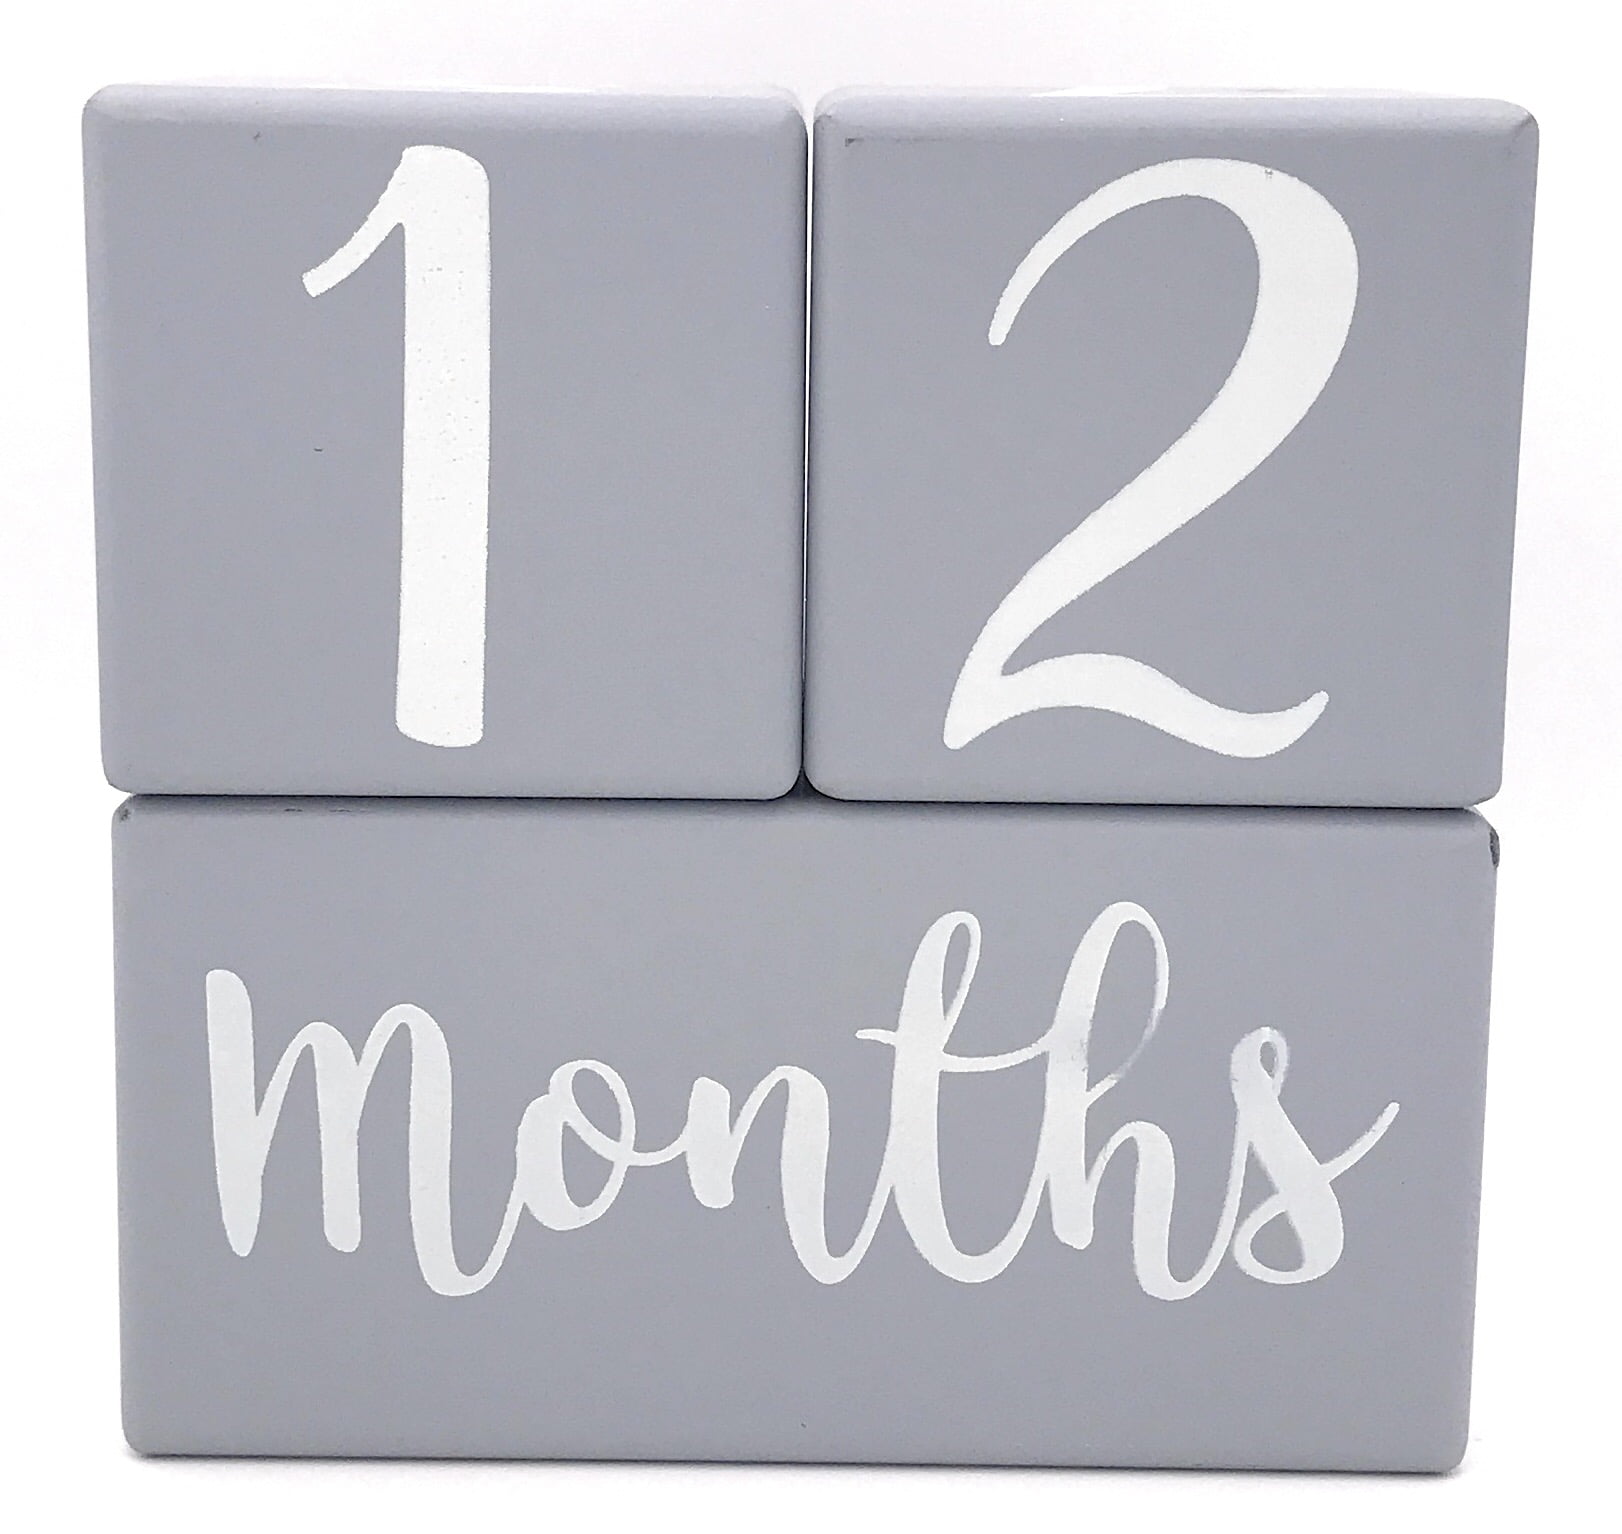 Baby Month Blocks Wooden Baby Milestone Age Blocks with Weeks Months Years Baby Photoshoot Props, Small Size,4cm 